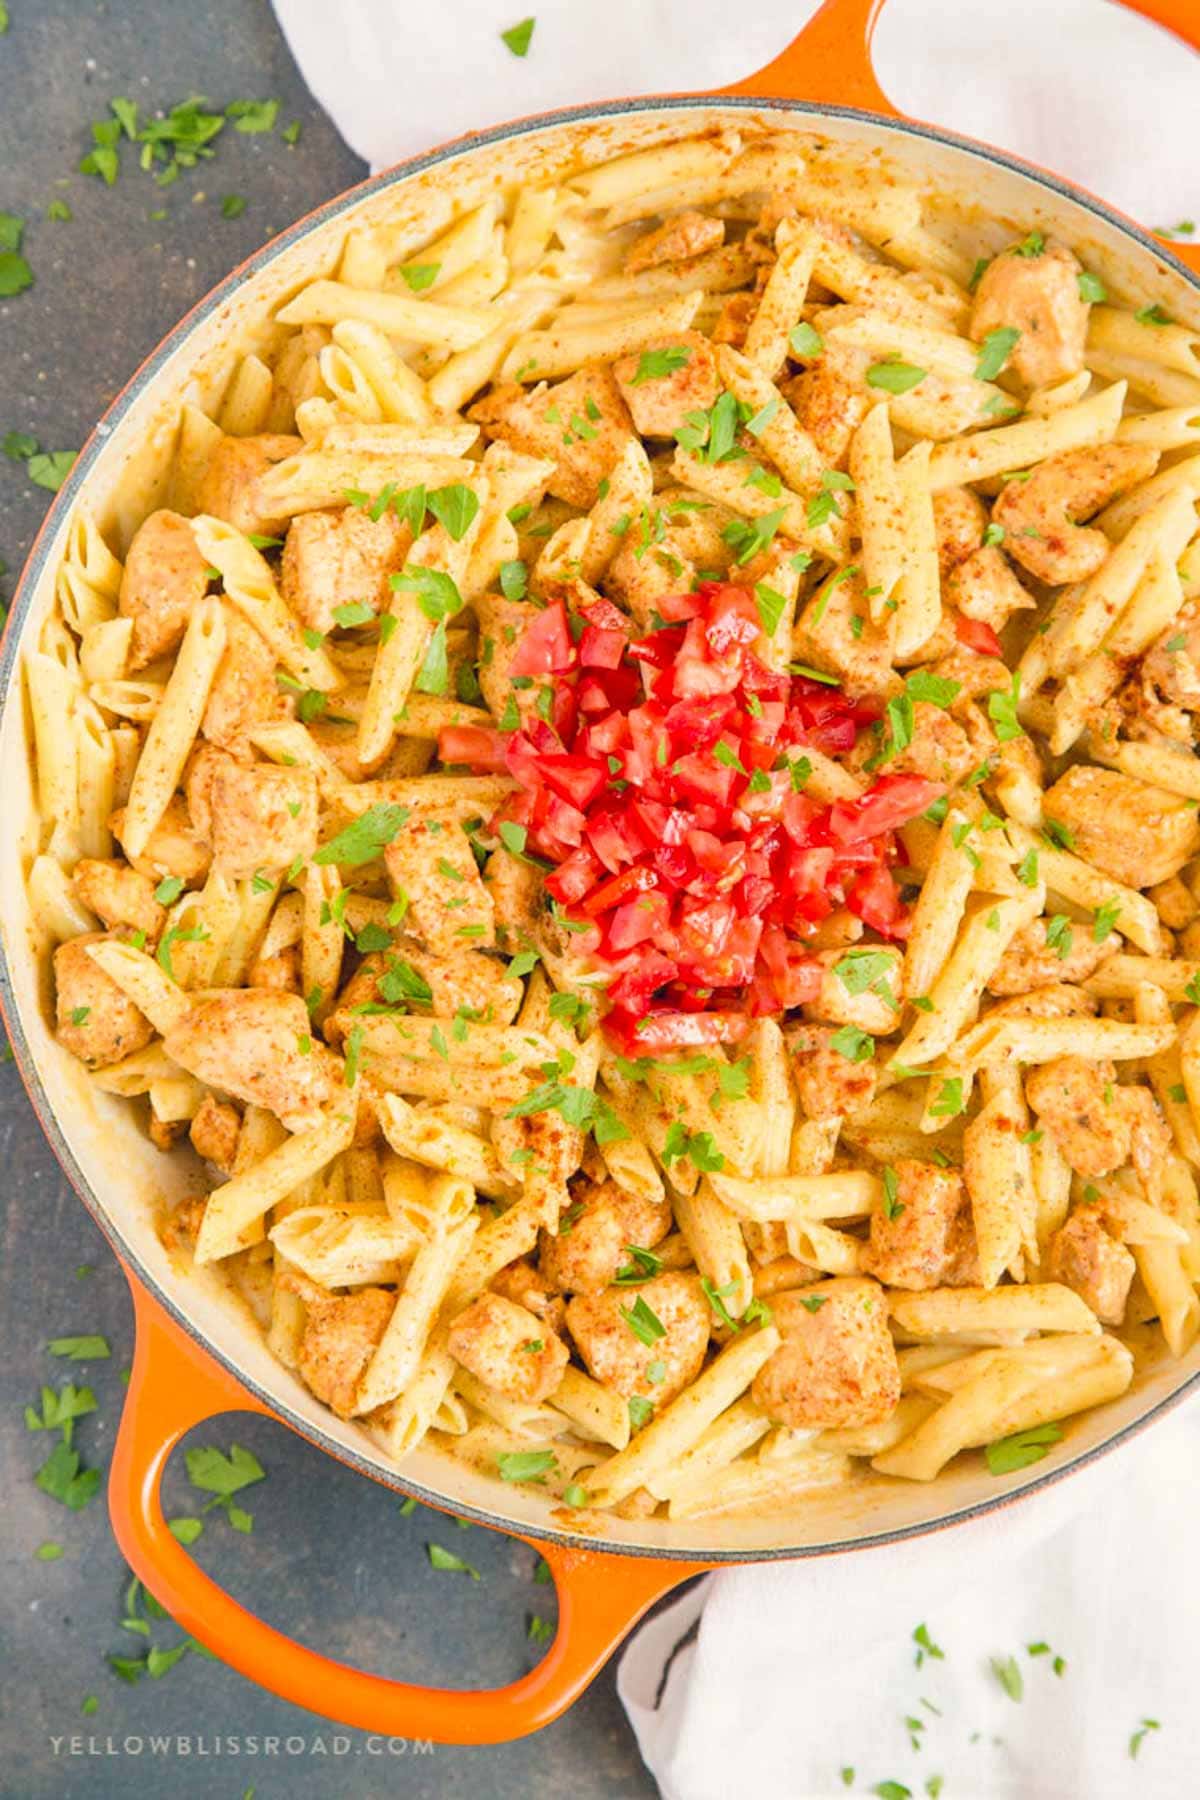 Pasta and chicken with diced tomatoes in a creamy sauce and in a large skillet with orange handles.